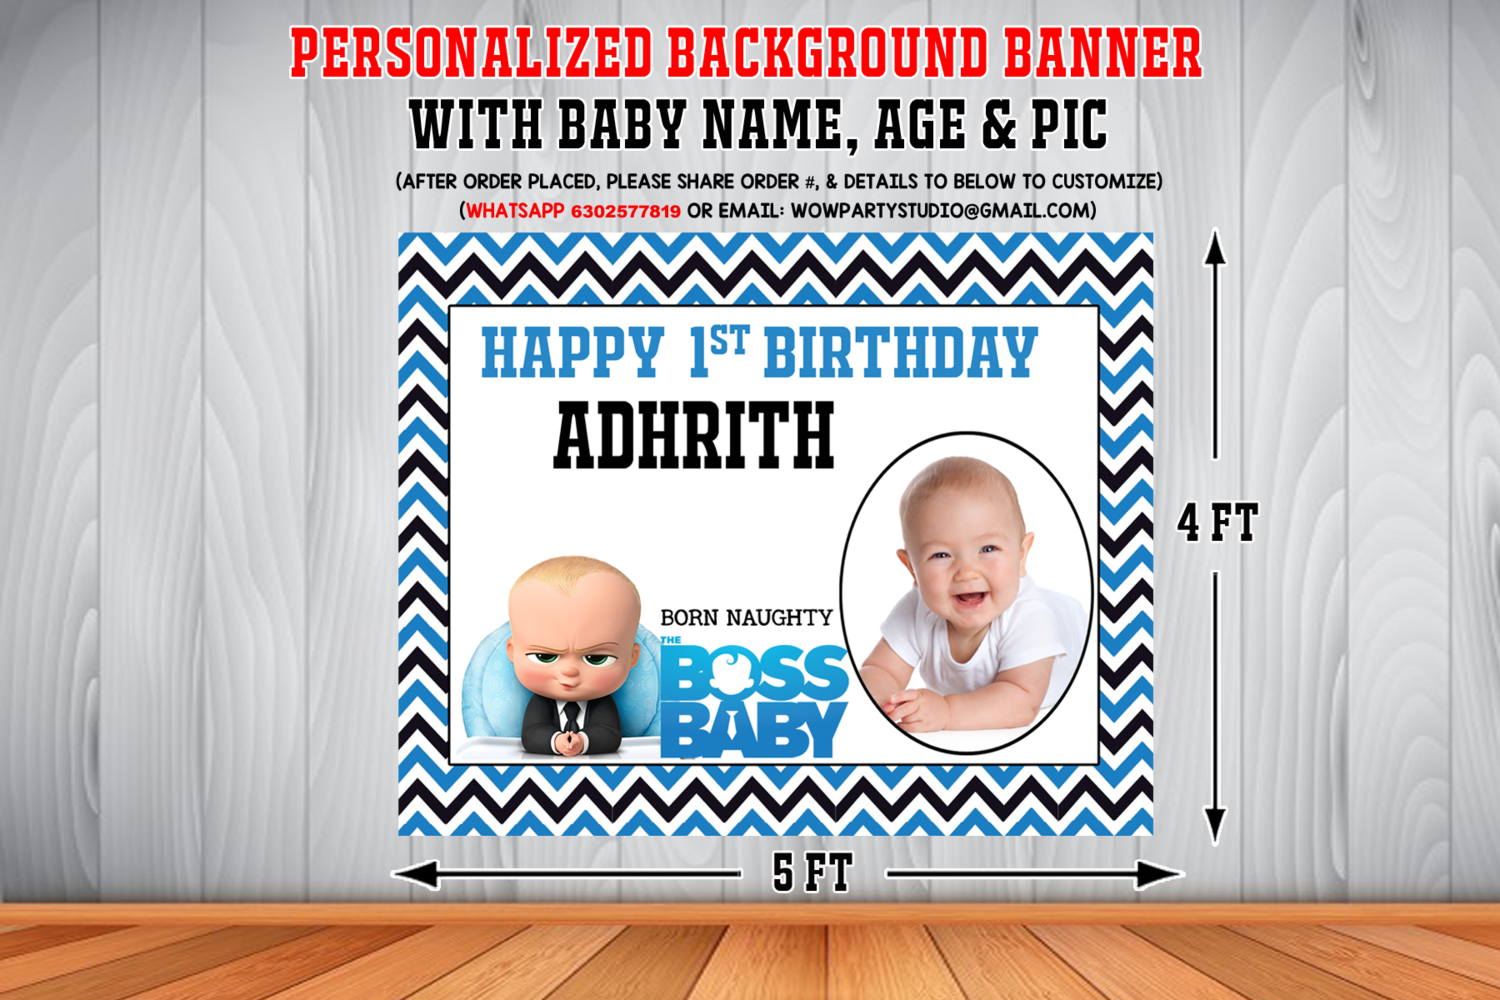 Boss Baby Backdrop / Background Pic Banner (4ft x 5ft)